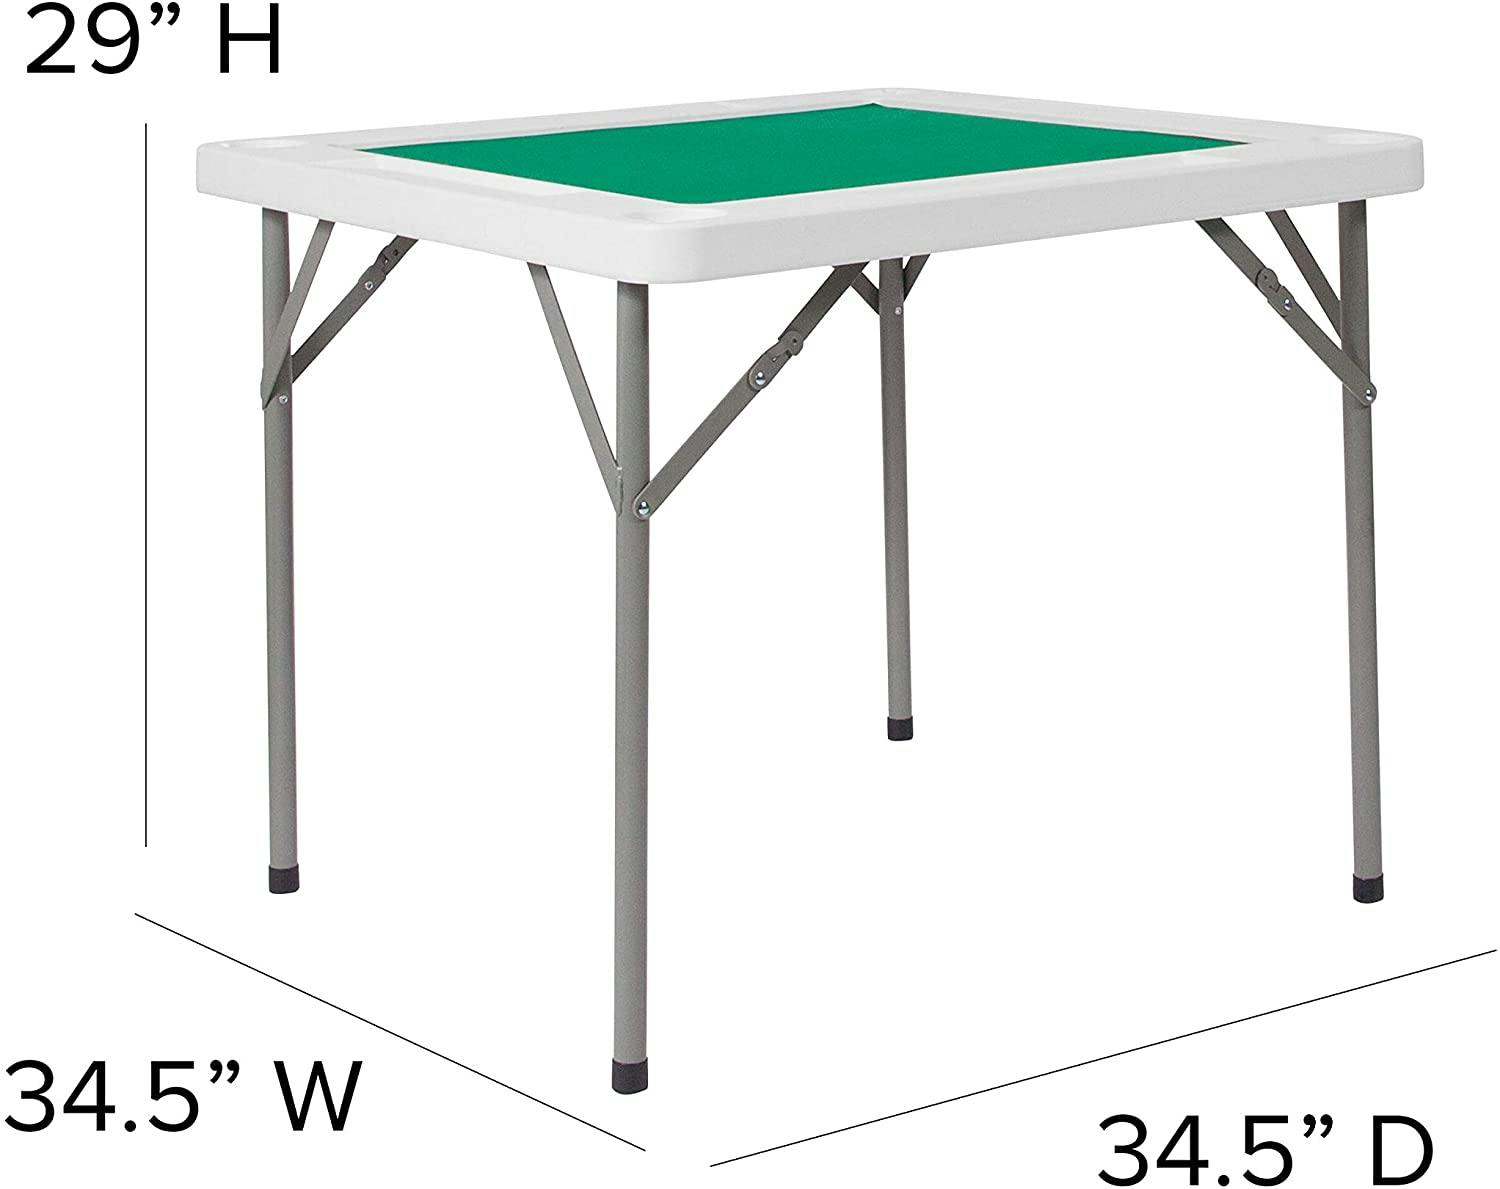 Flash Furniture 34.5" Square 4-Player Folding Card Game Table with Green Playing Surface and Cup Holders